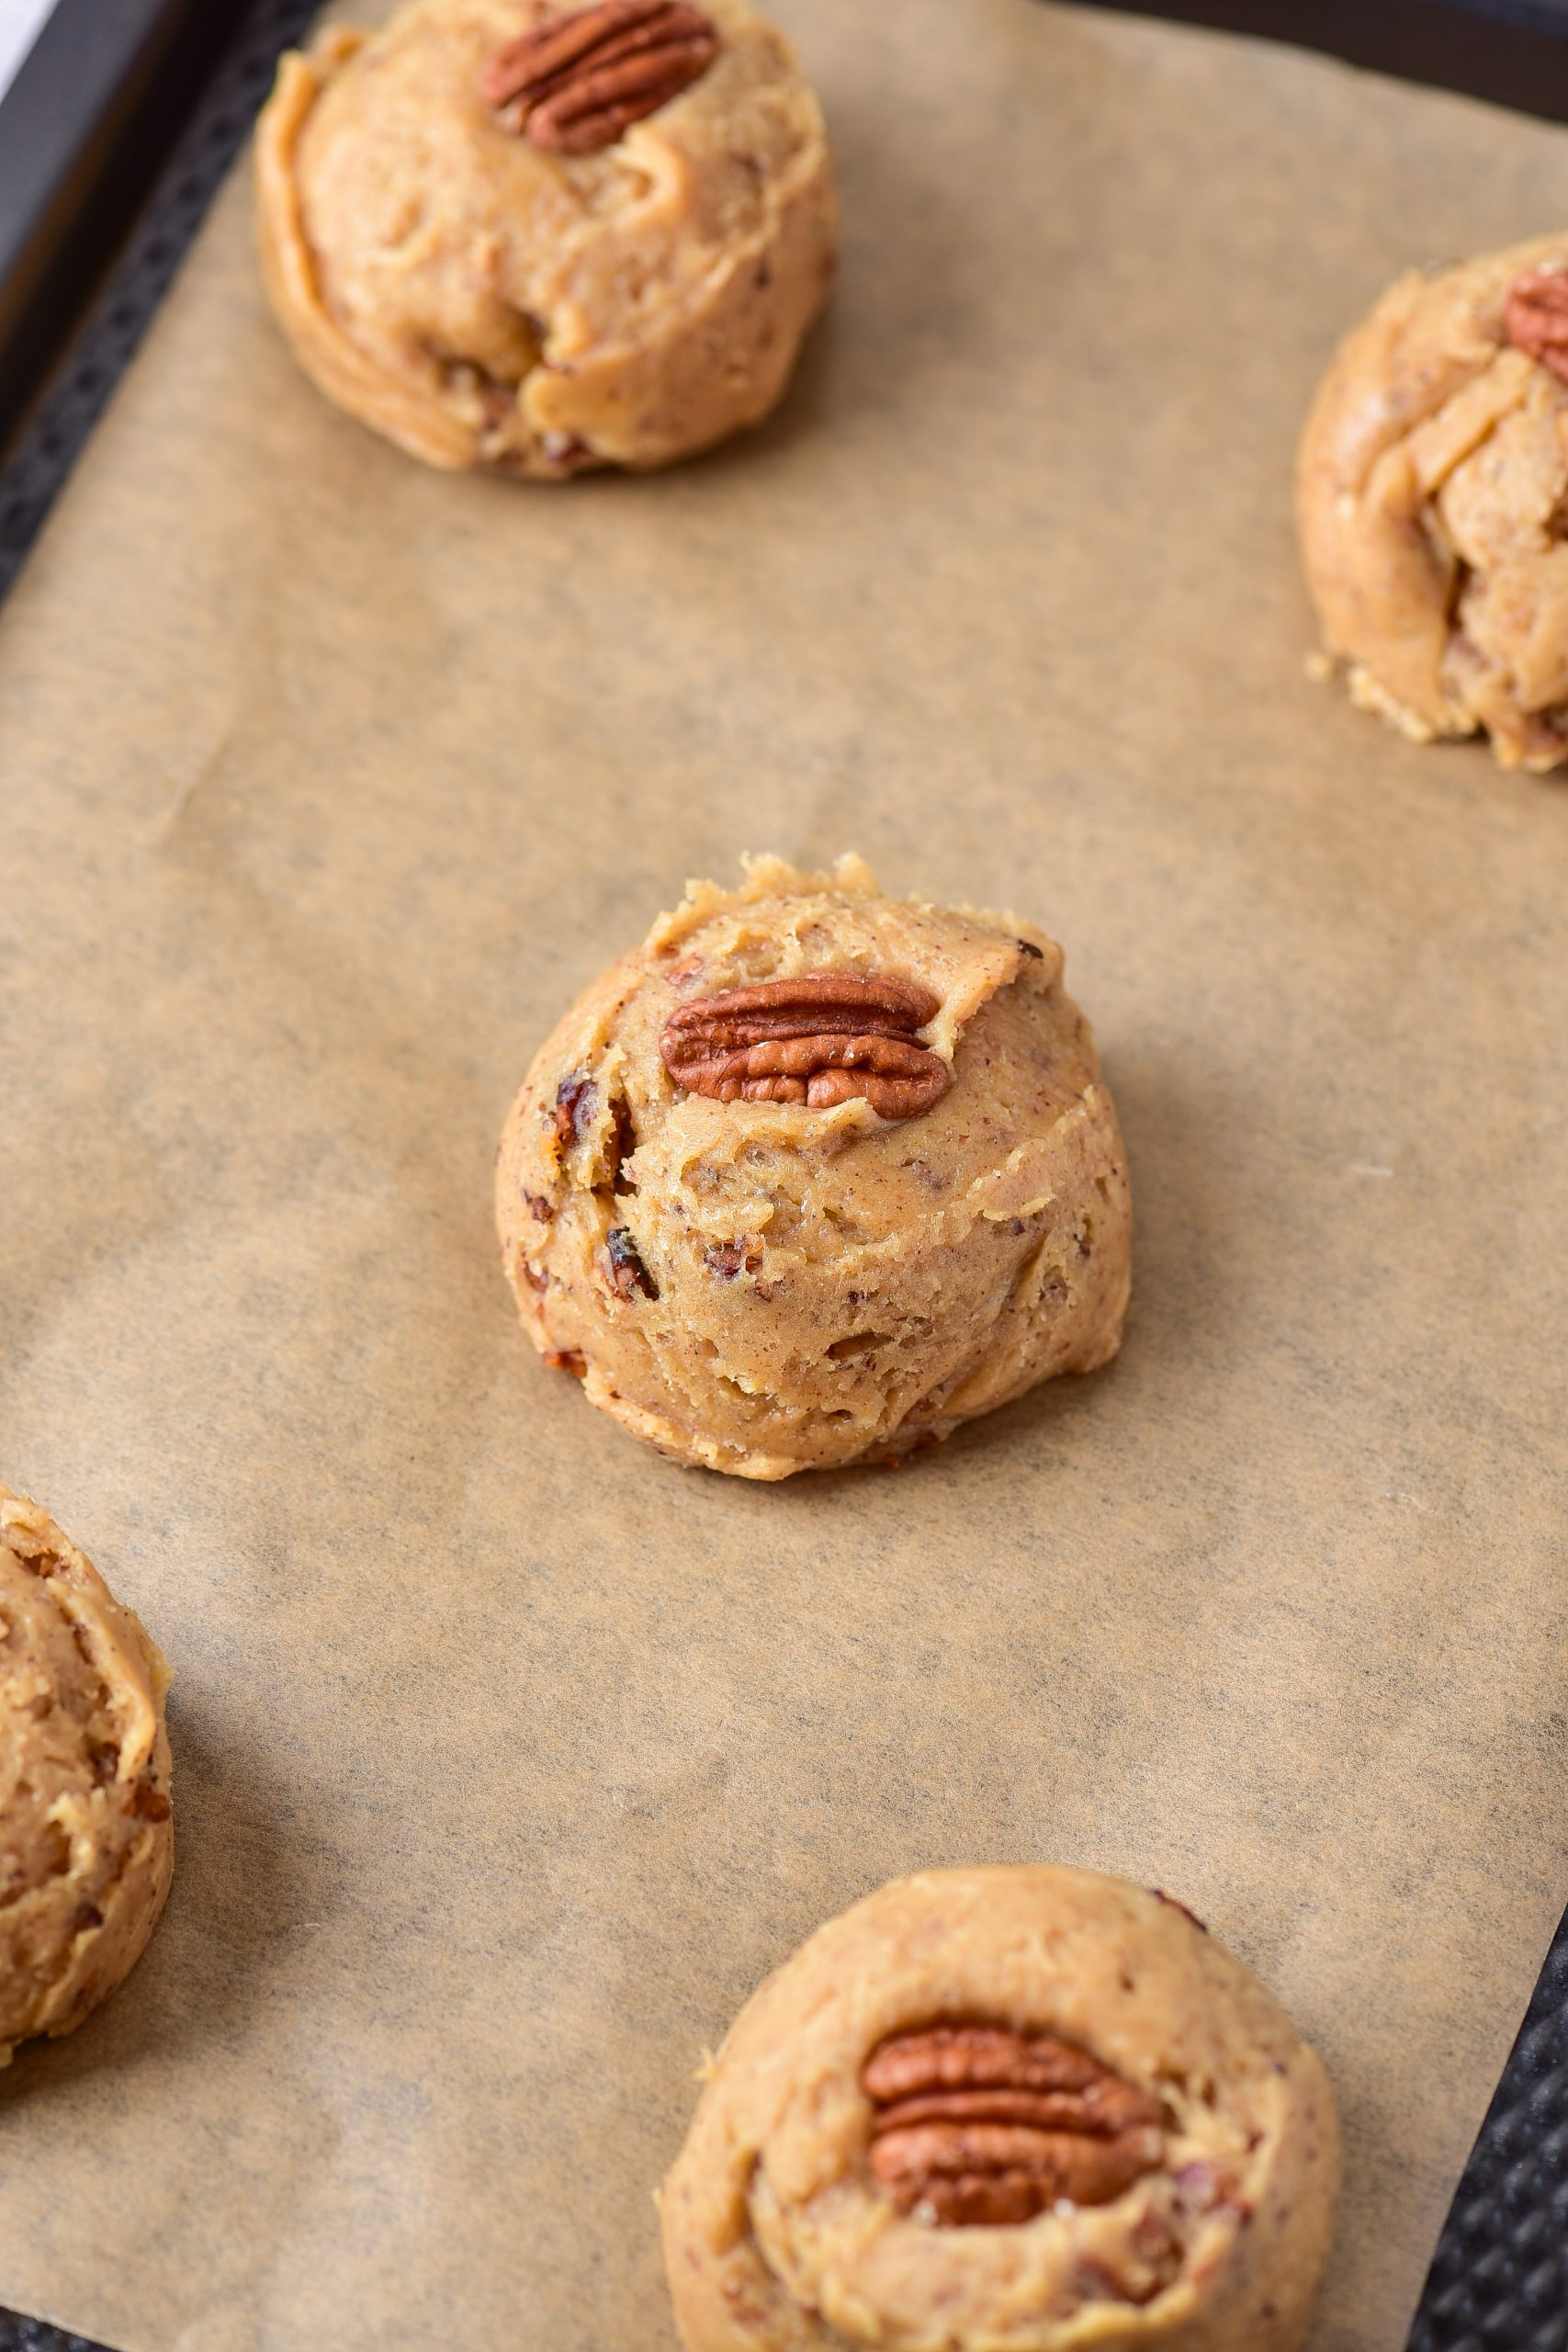 Flatten the cookies slightly, and place a pecan half in the center of each one